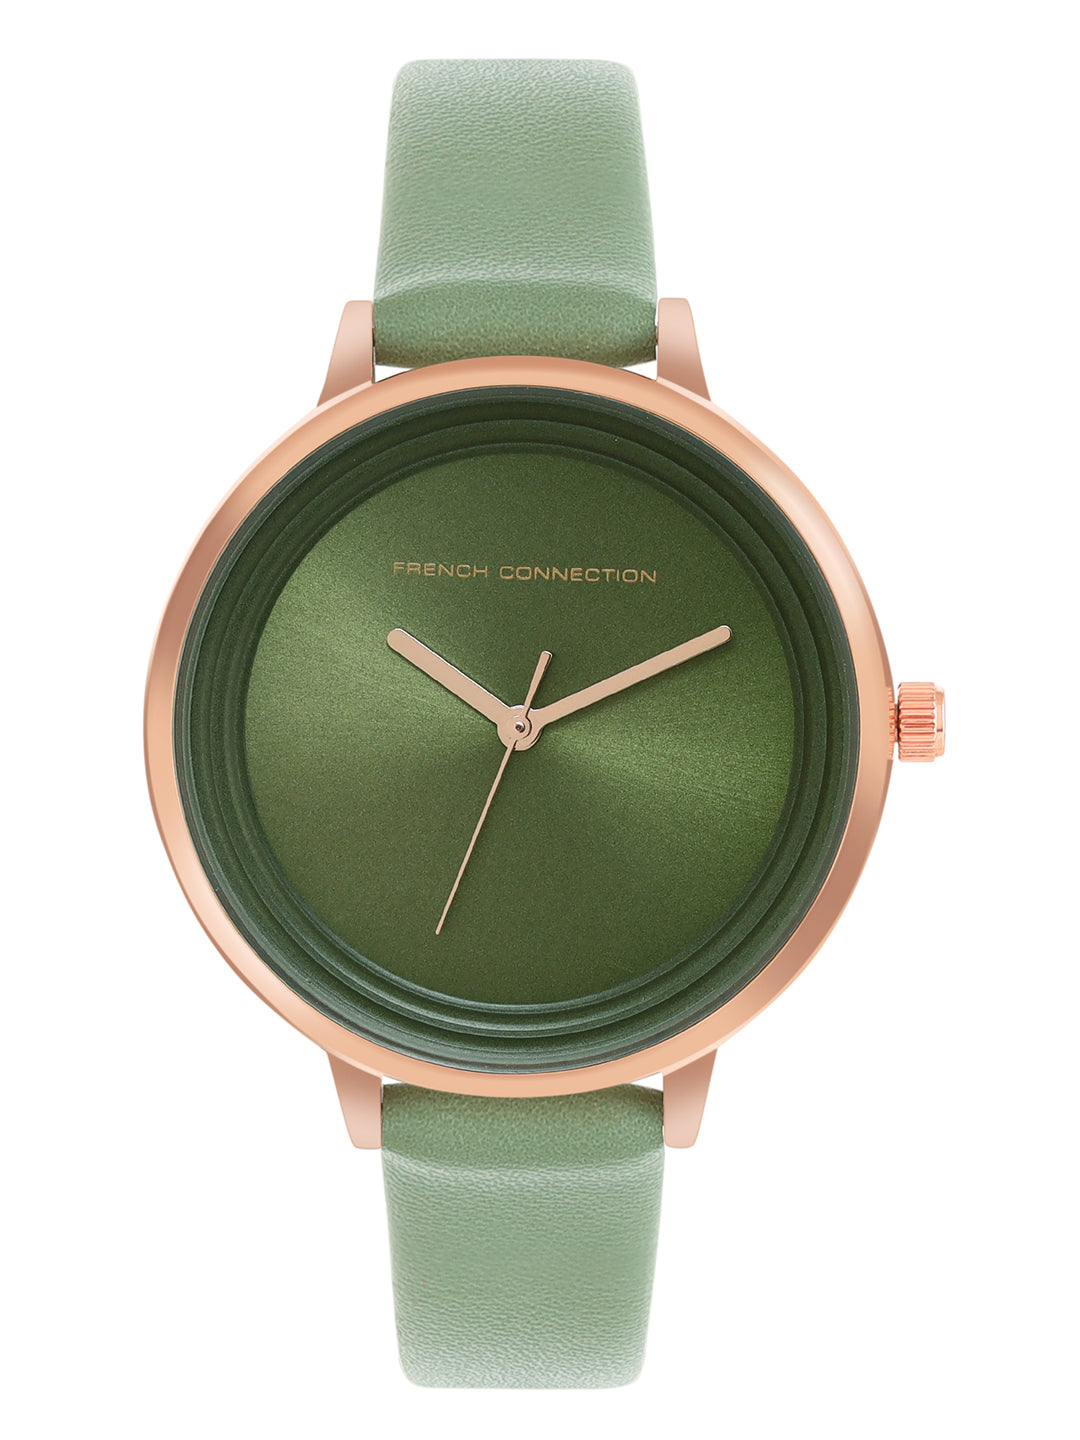 French Connection Analog Green Dial Women's Watch-FCN0001V